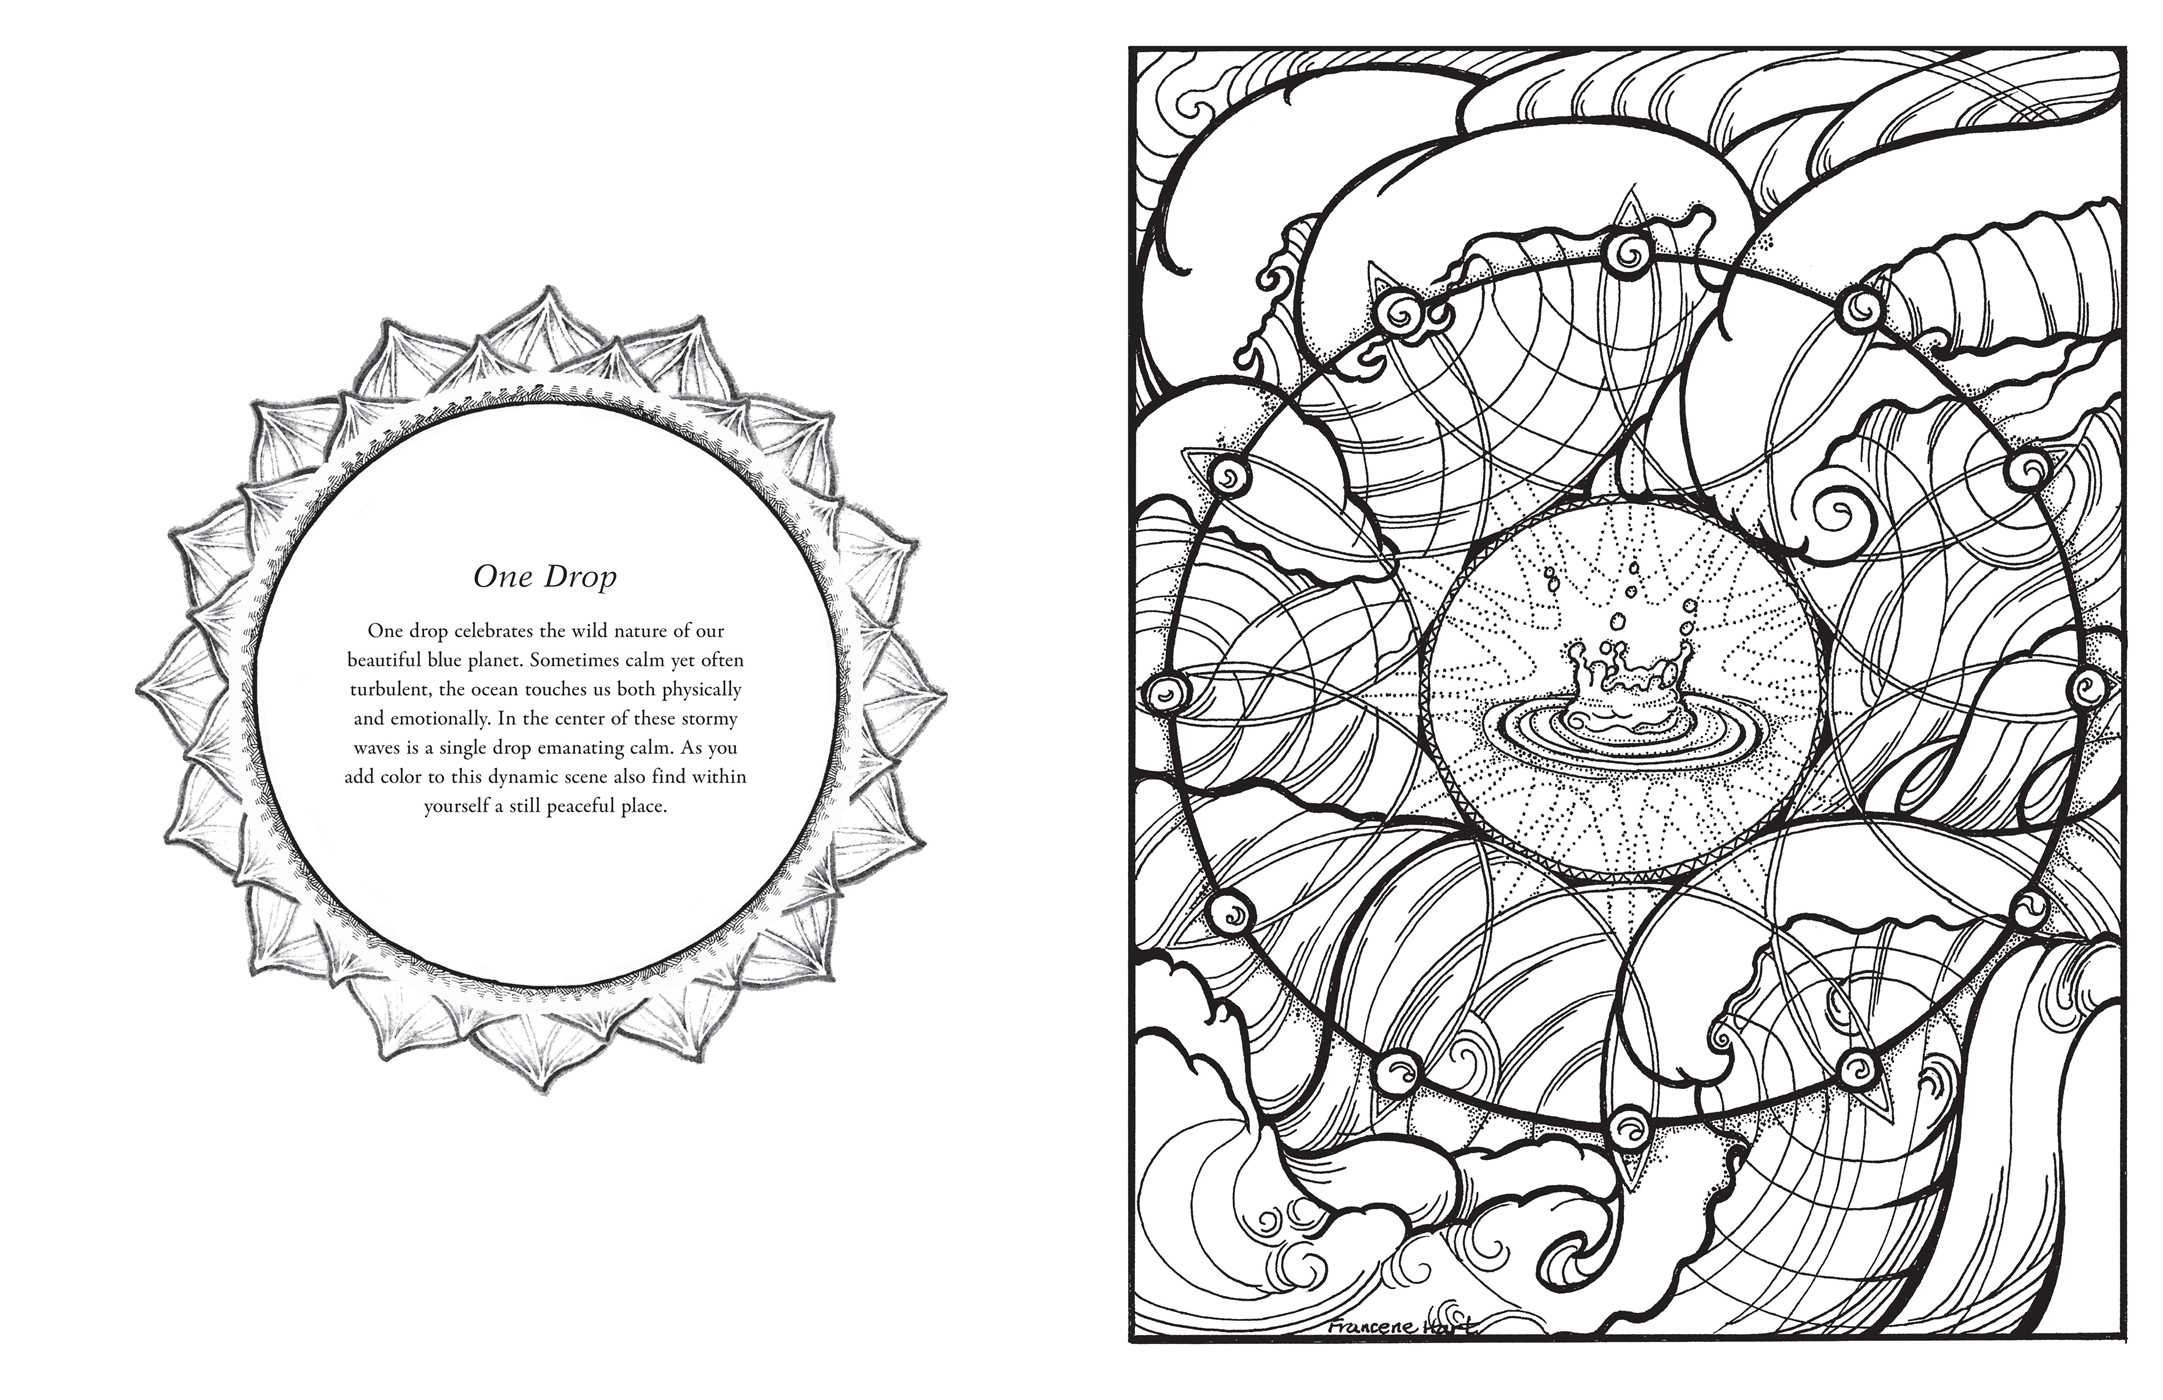 Sacred Geometry Coloring Books
 Sacred Geometry Coloring Book